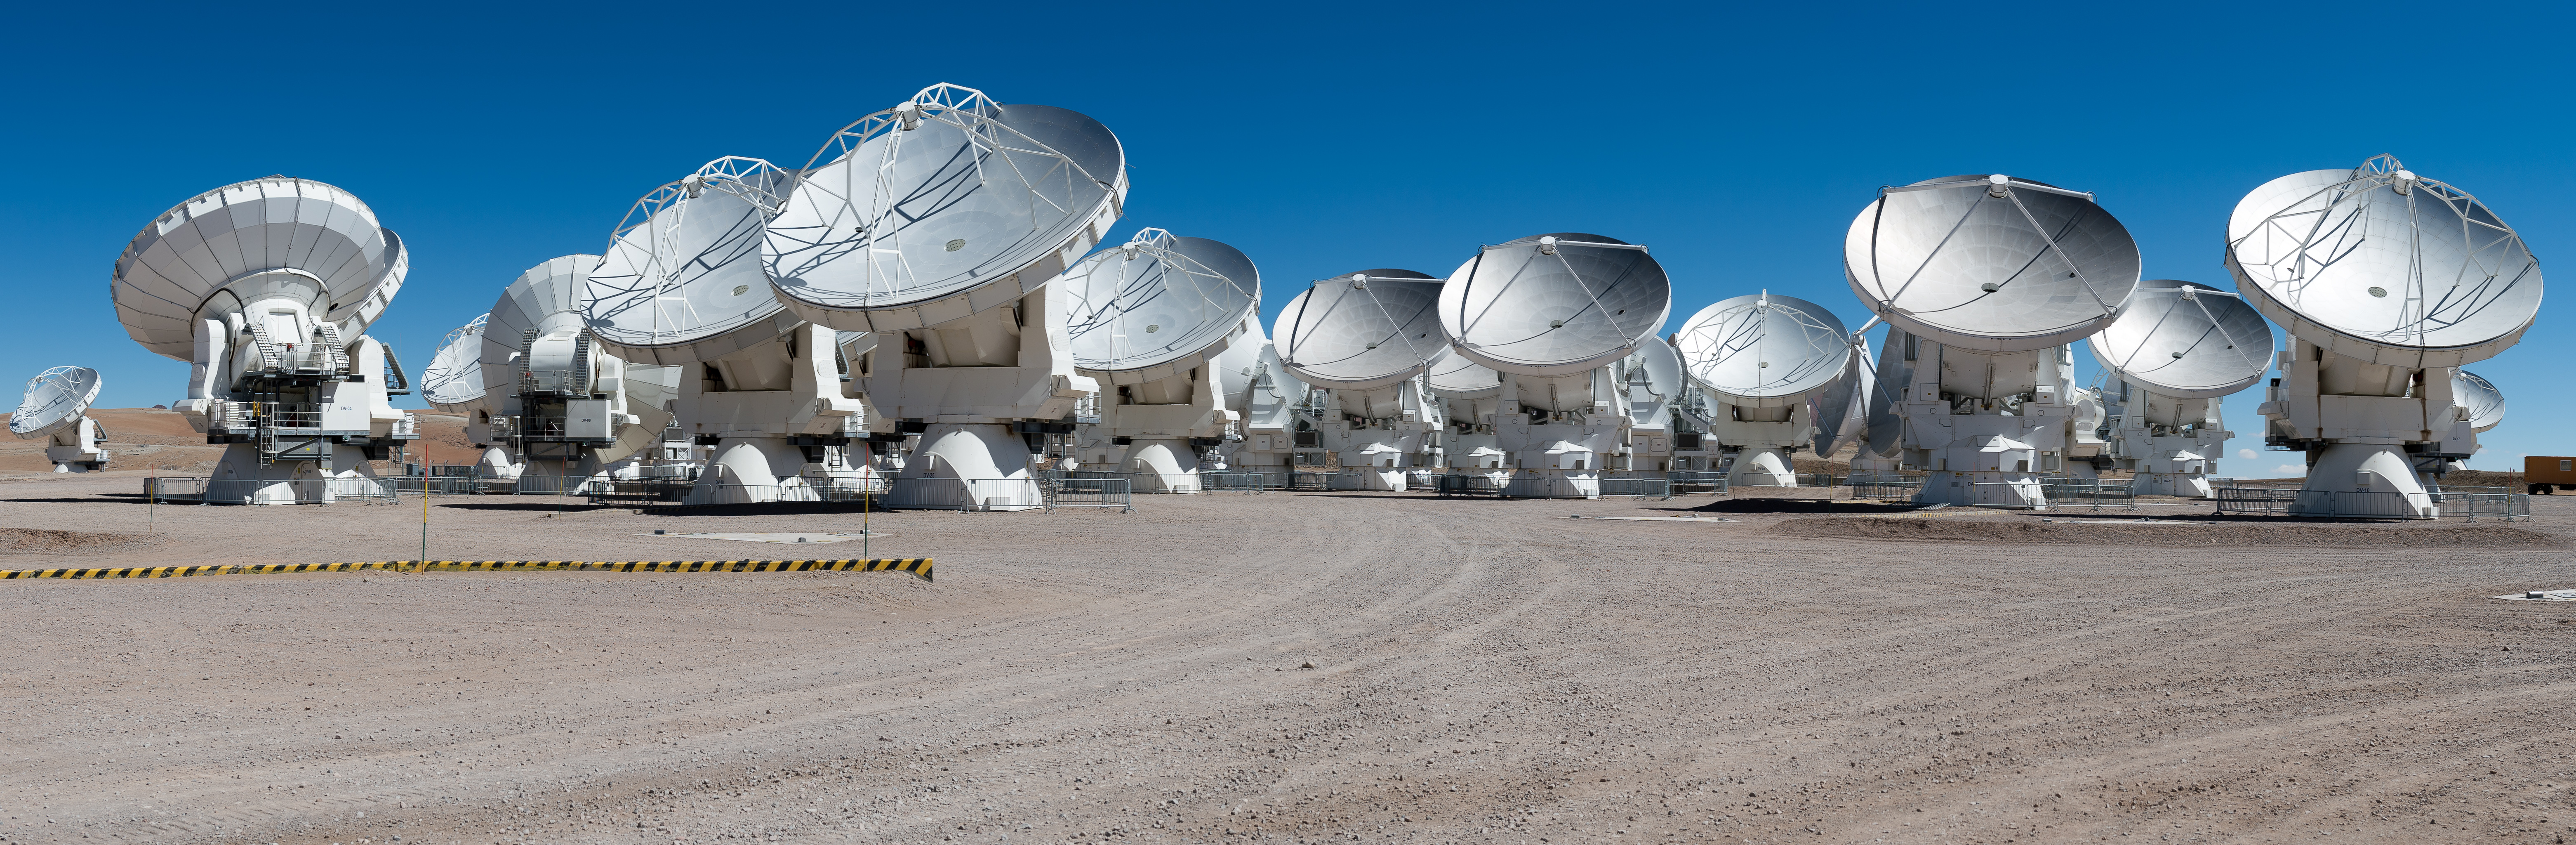 ALMA: The Atacama Large Millimeter/Submillimeter Array uses multiple radio dishes to improve resolution through interferometry.  https:/commons.wikimedia.org/wiki/File:ALMA_-_Antennas_in_compact_configuration.jpg; 